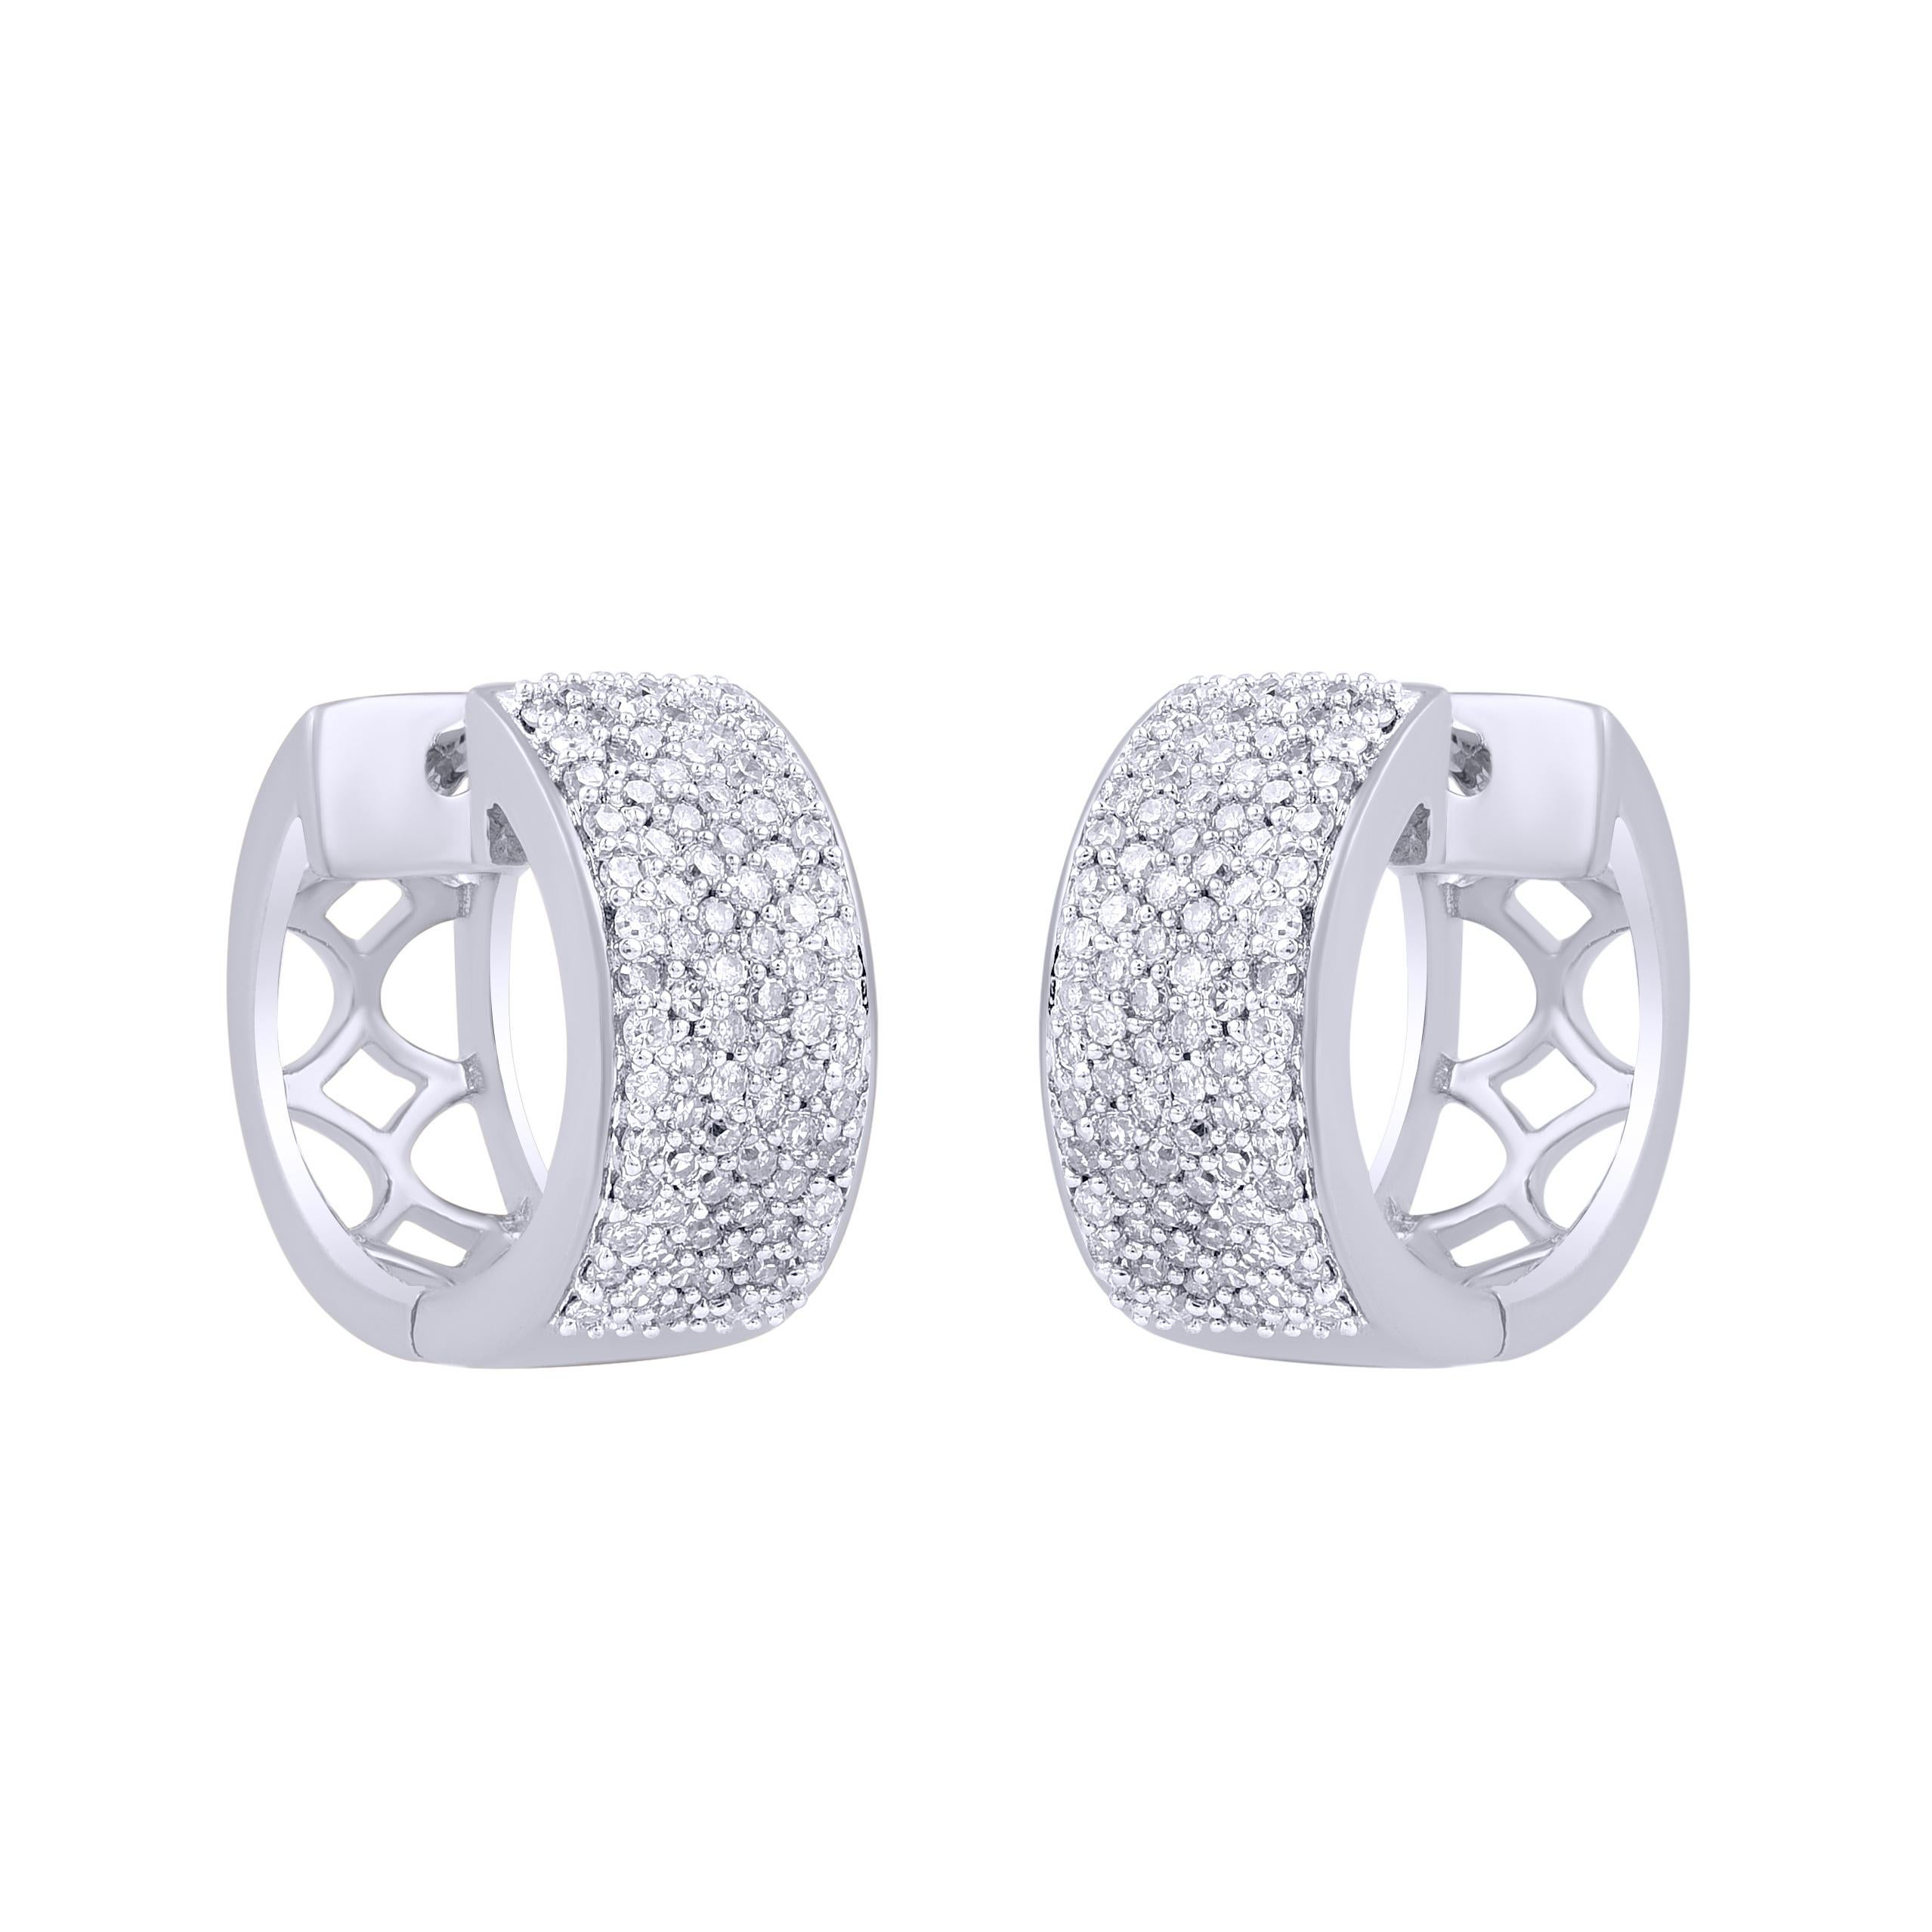 Adorn your formal wear with extra glitz when you put on these huggie hoop earrings!  Crafted in 14 karat white gold with 168 single cut diamond in pave setting. These earring secure with hinged backs. Total diamond weight is 0.50 carat. The white